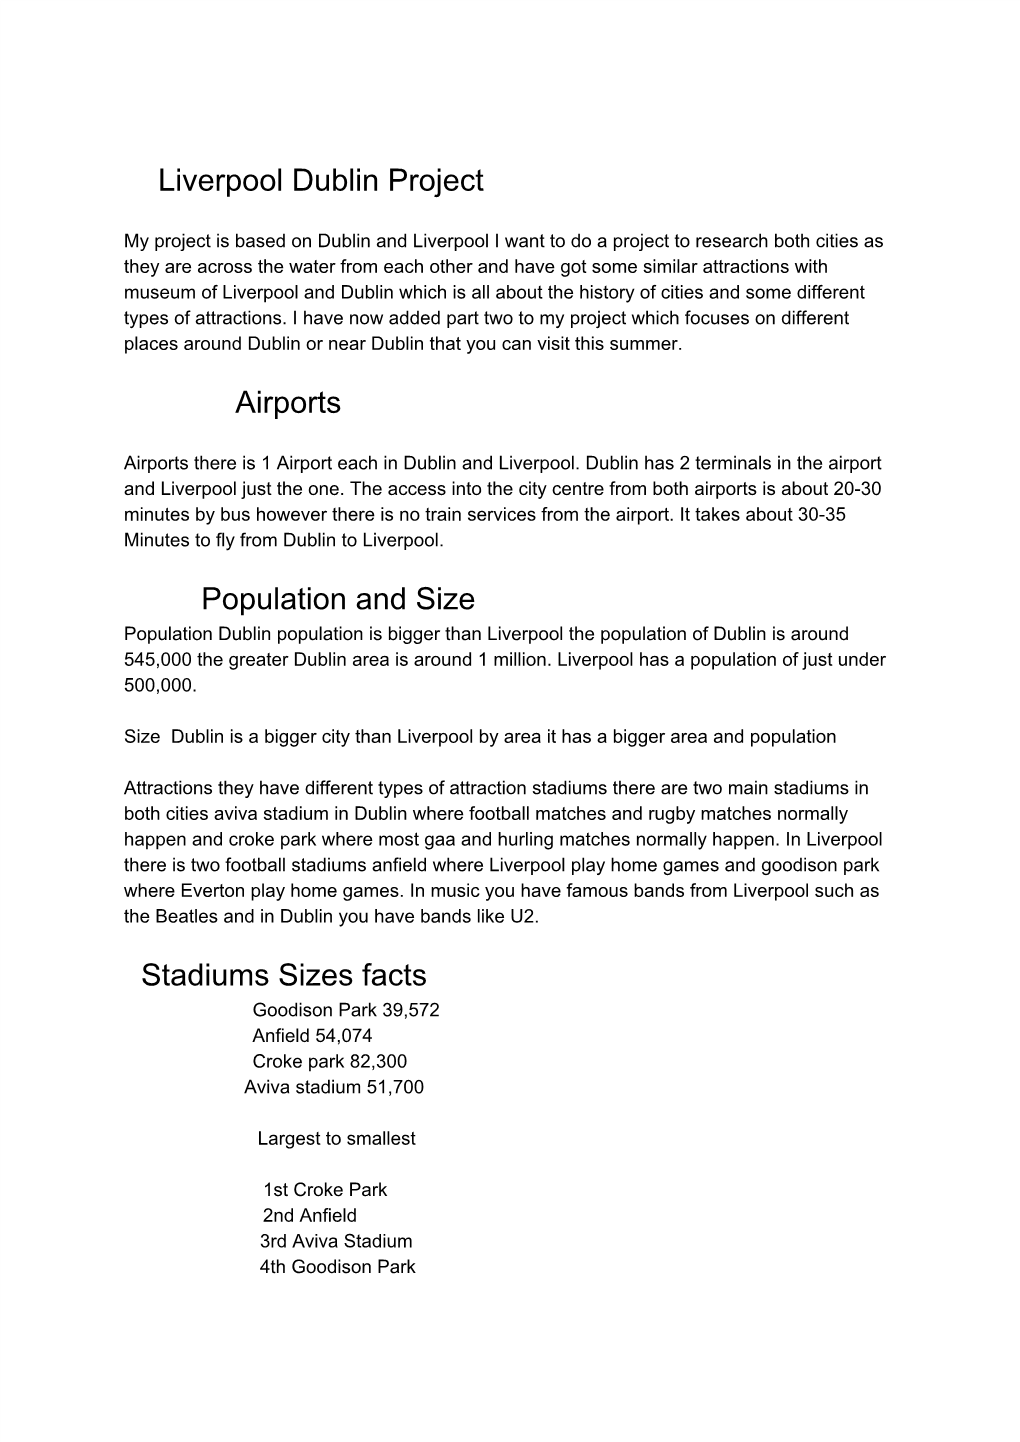 Liverpool Dublin Project Airports ​Population and Size Stadiums